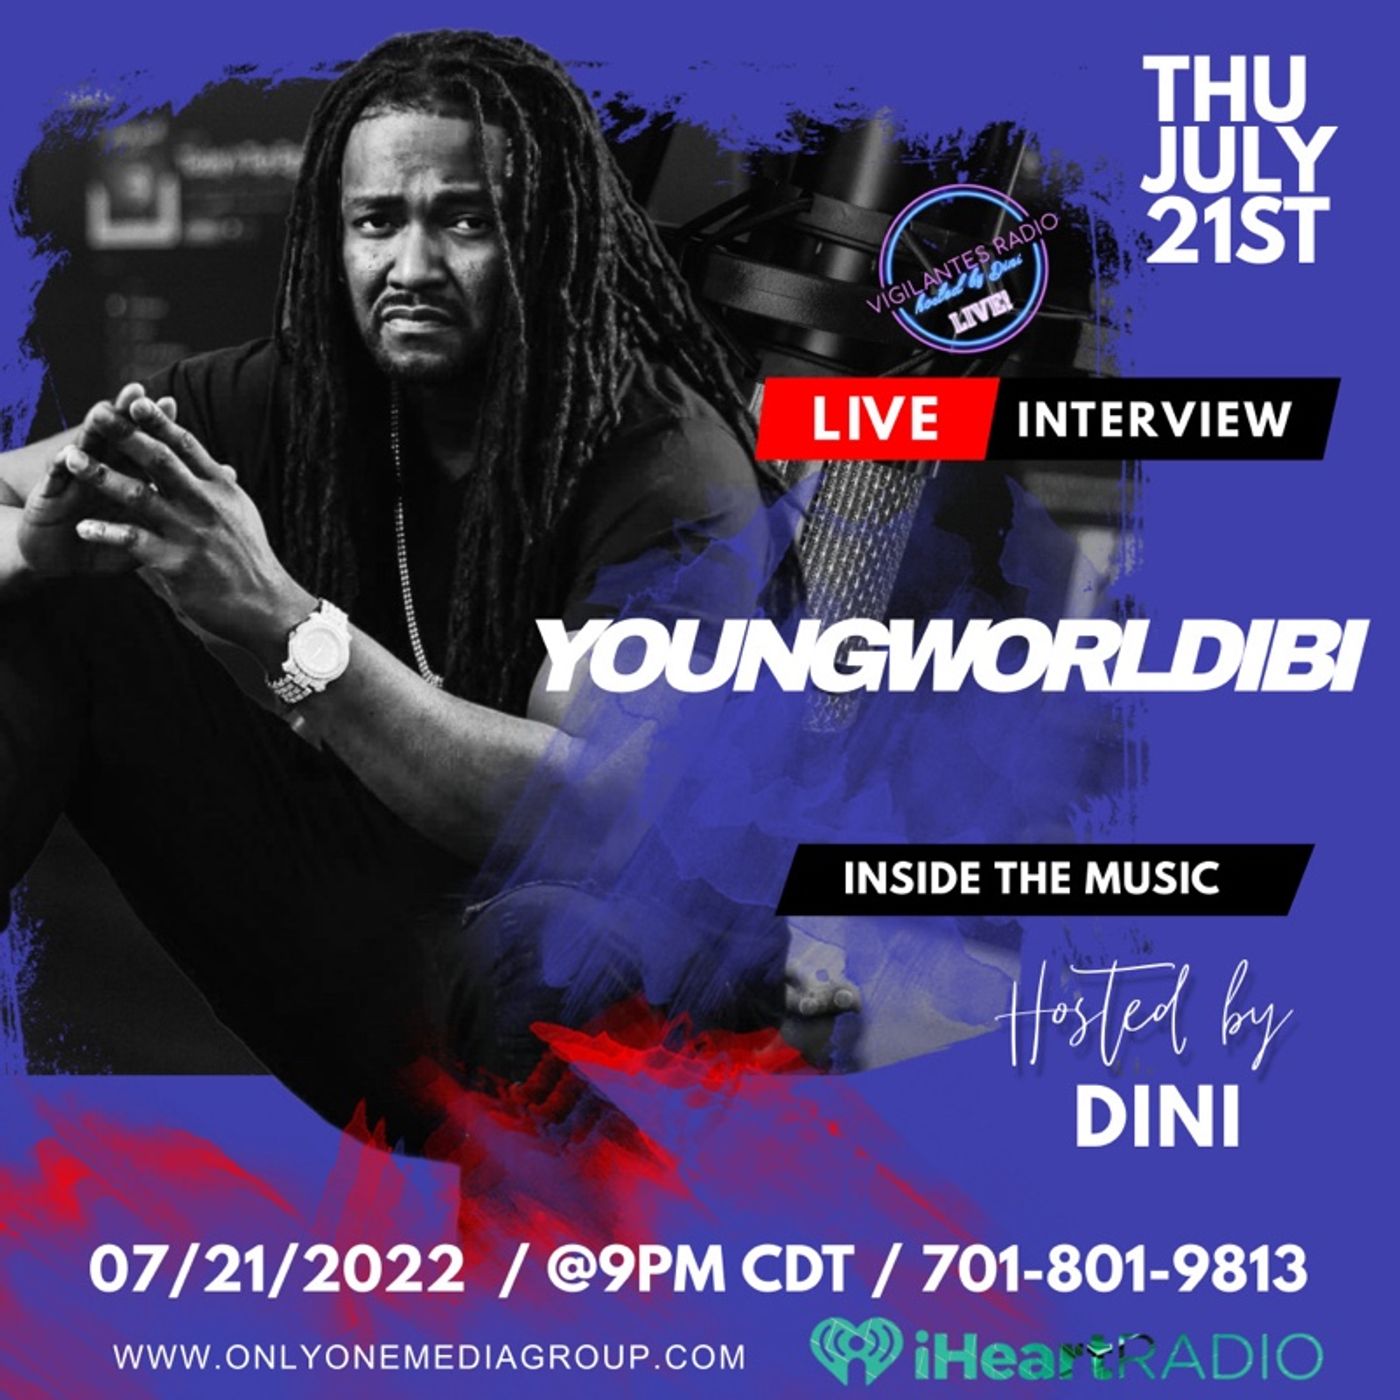 The Youngworldibi Interview.